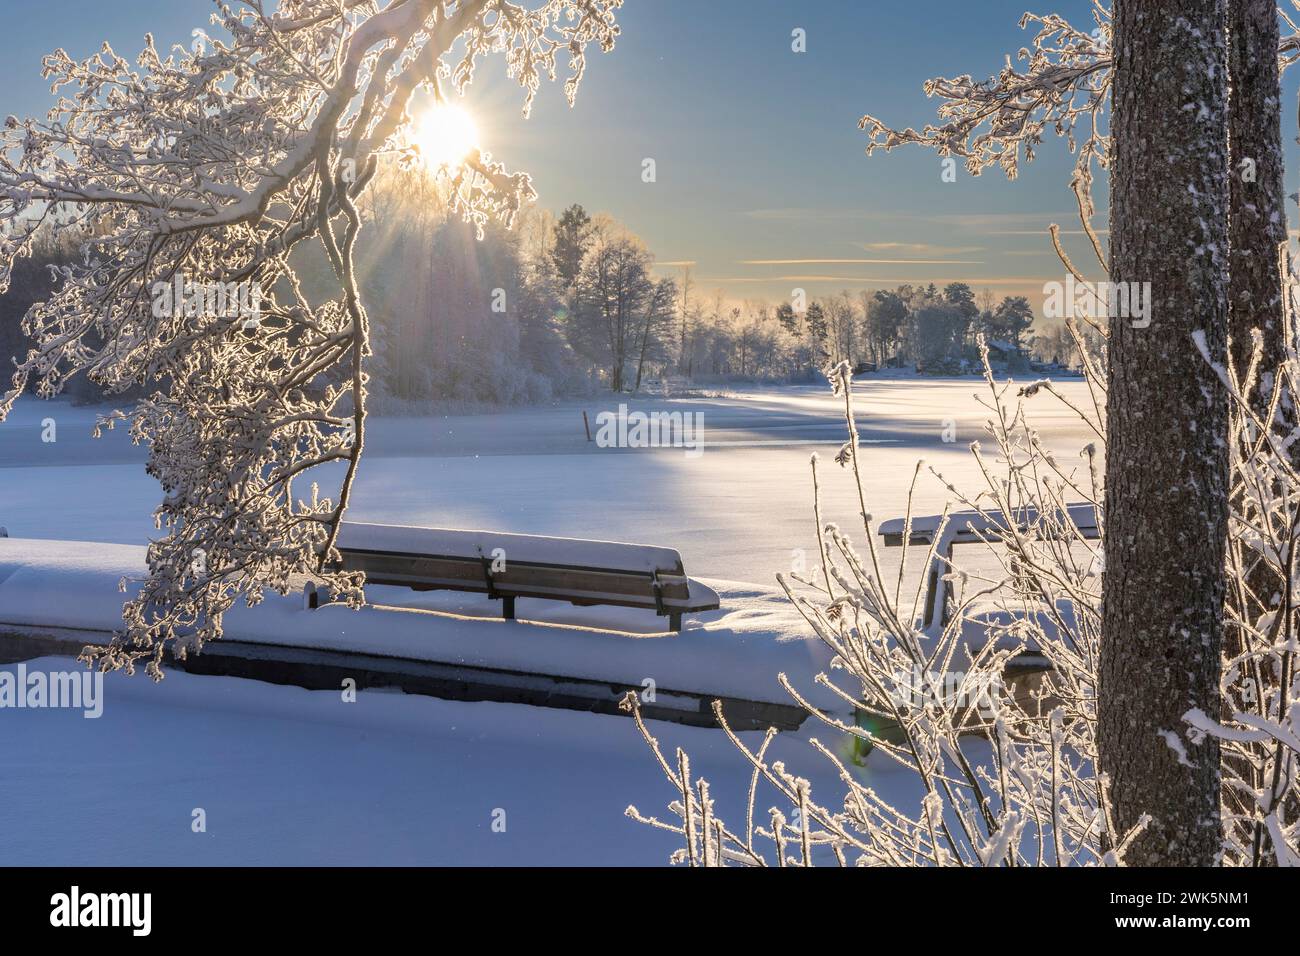 Sunrise over snowy golf course with ice covered trees Stock Photo